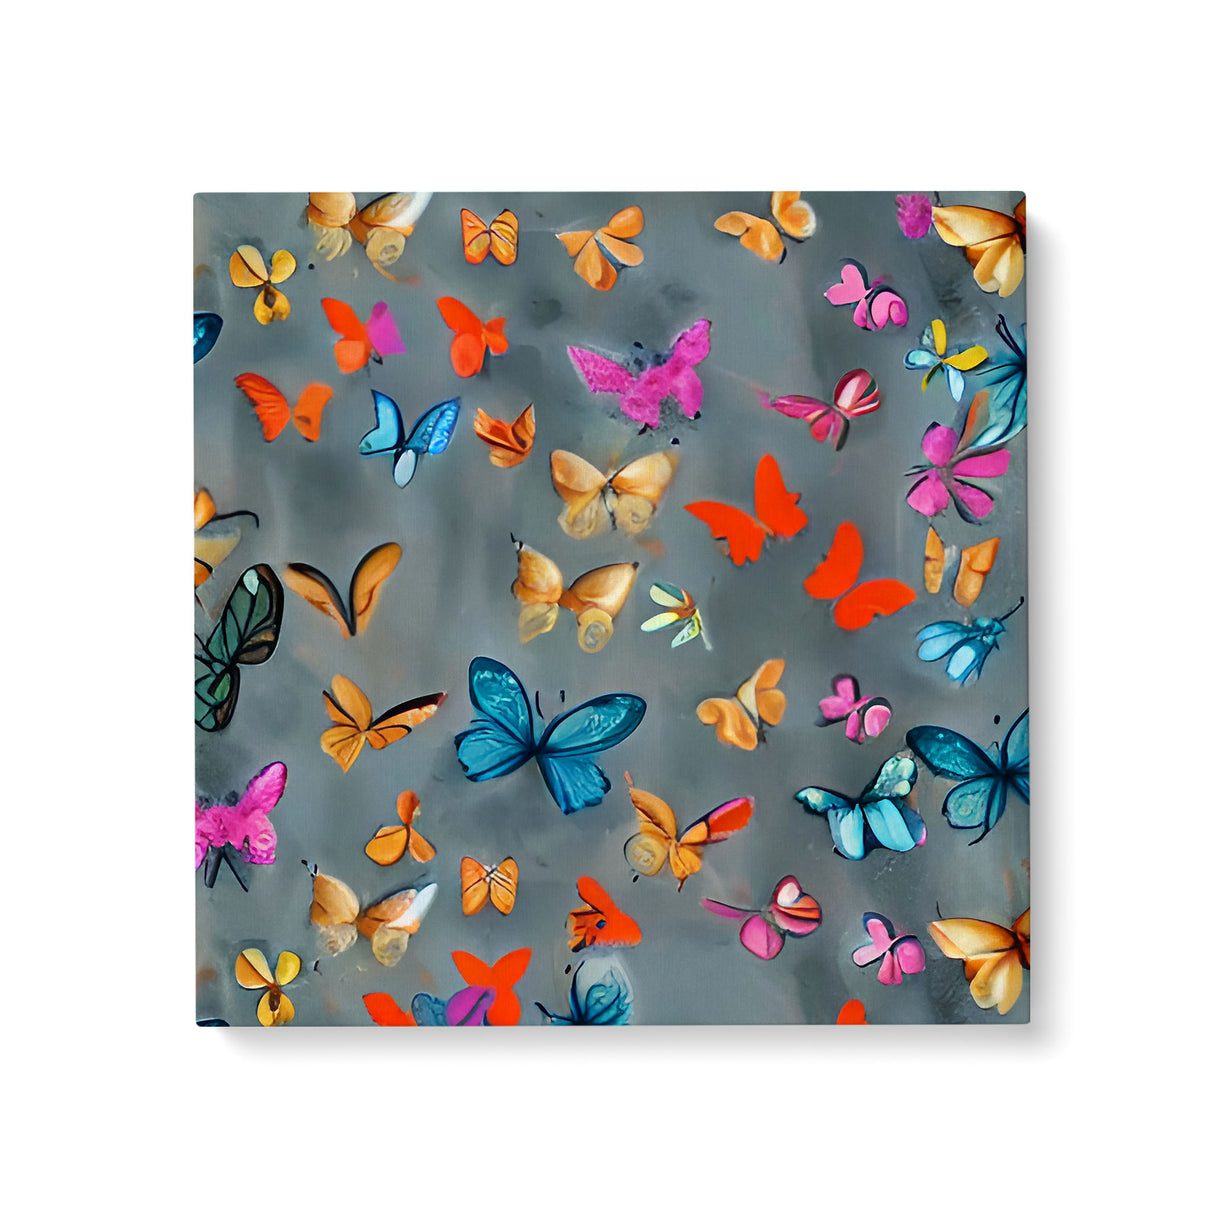 Colorful Insect Wall Art Canvas {Butterfly Party} Canvas Wall Art Sckribbles 24x24  